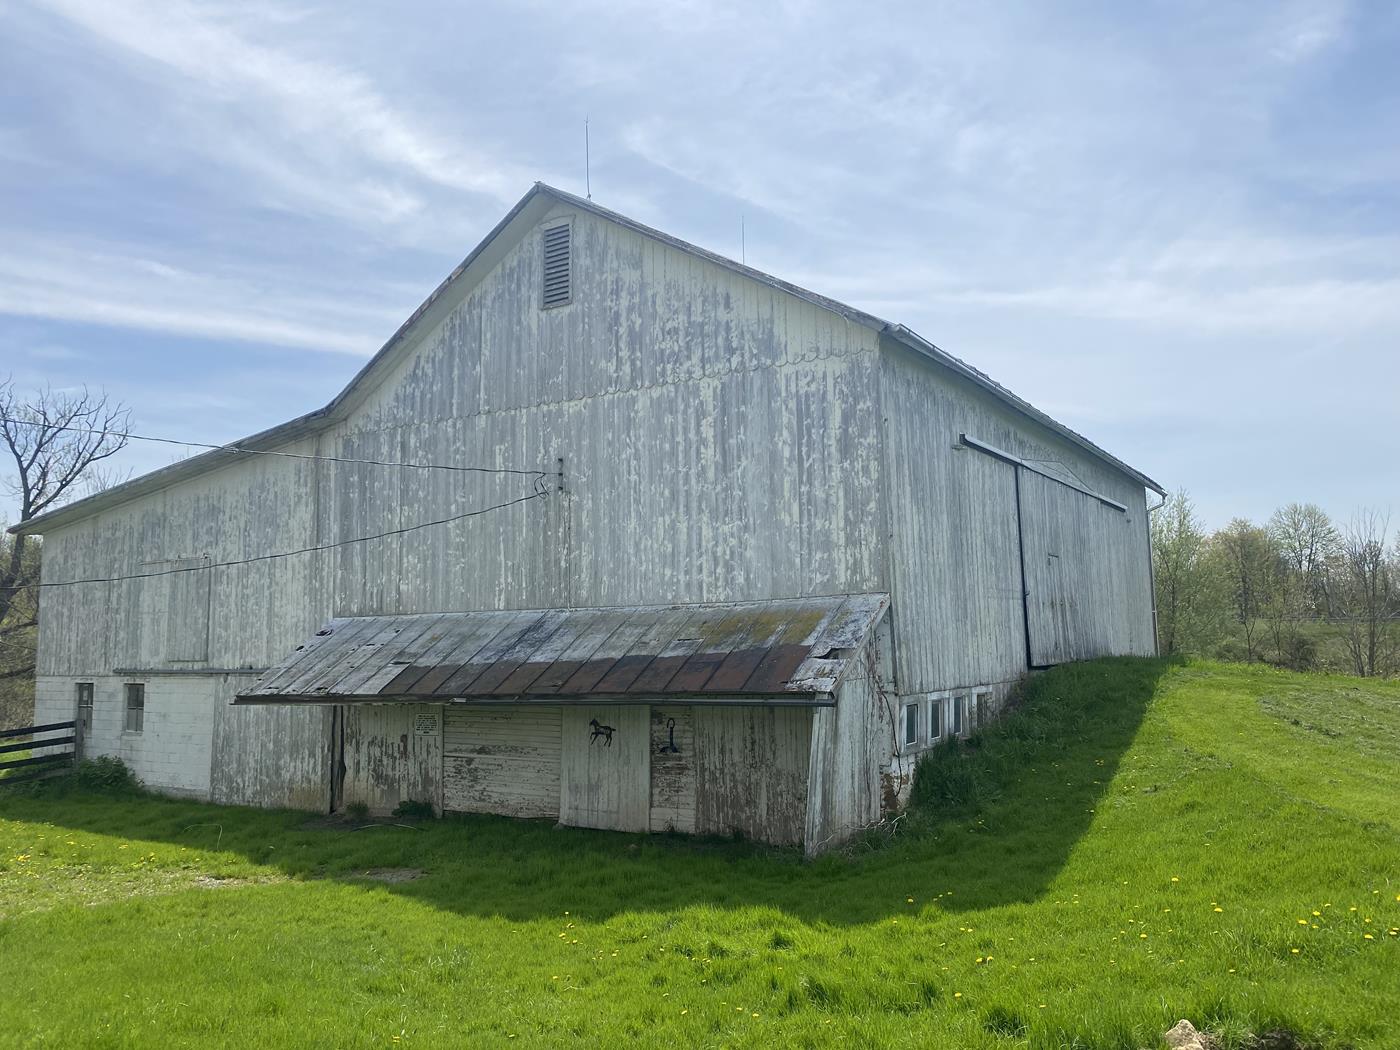 https://www.ohiovalleybarnsalvage.com/images/Marlatt Historic Ohio Barn Frame For Sale - Your Source For White Oak Hand-Hewn Timbers